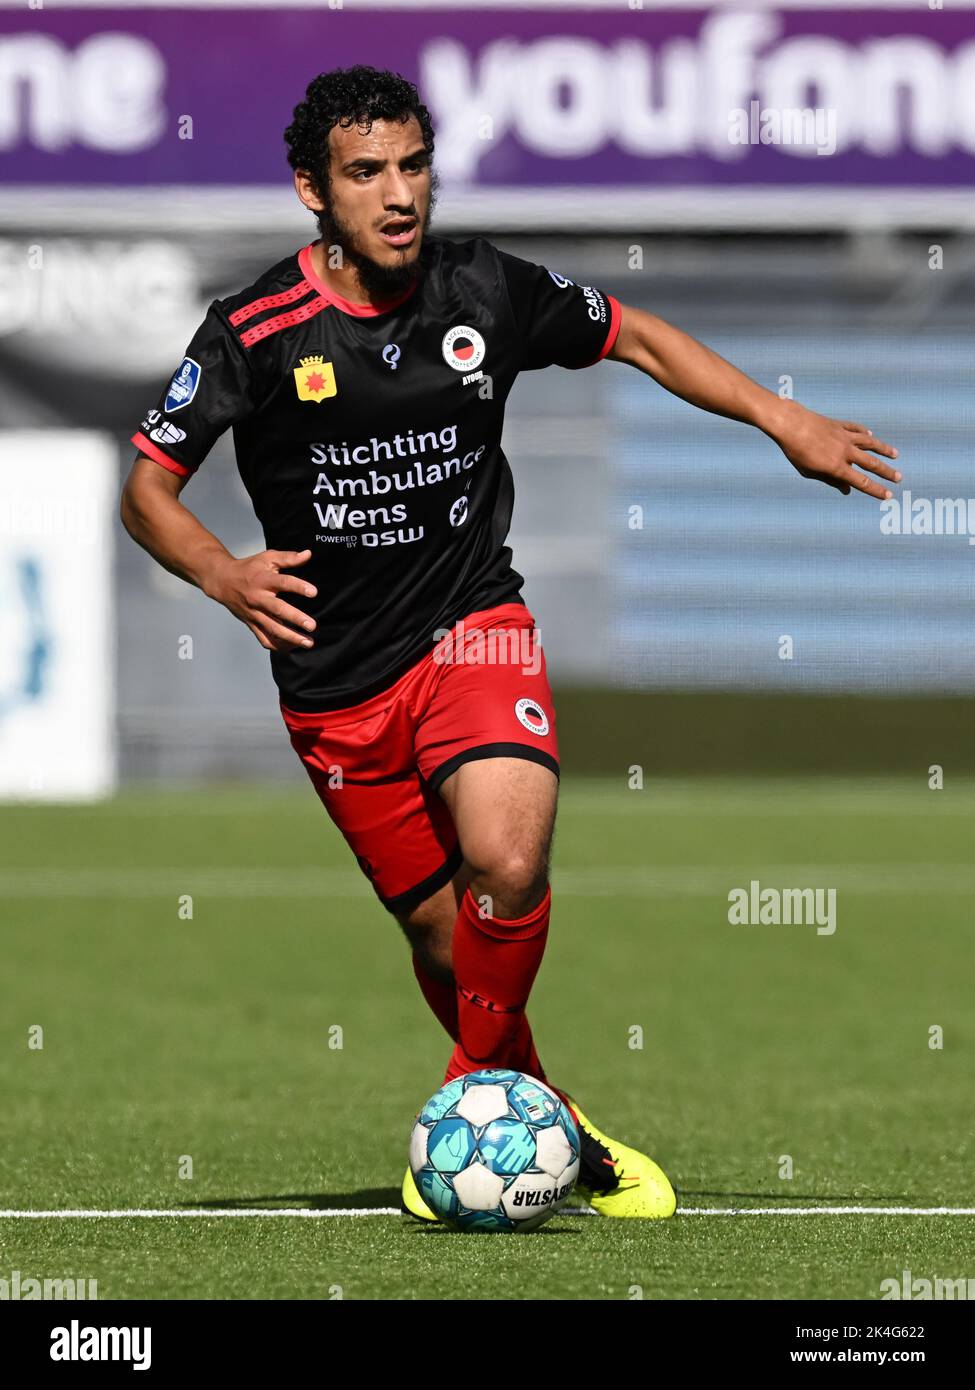 ROTTERDAM - Yassin Ayoub of sbv Excelsior during the Dutch Eredivisie ...